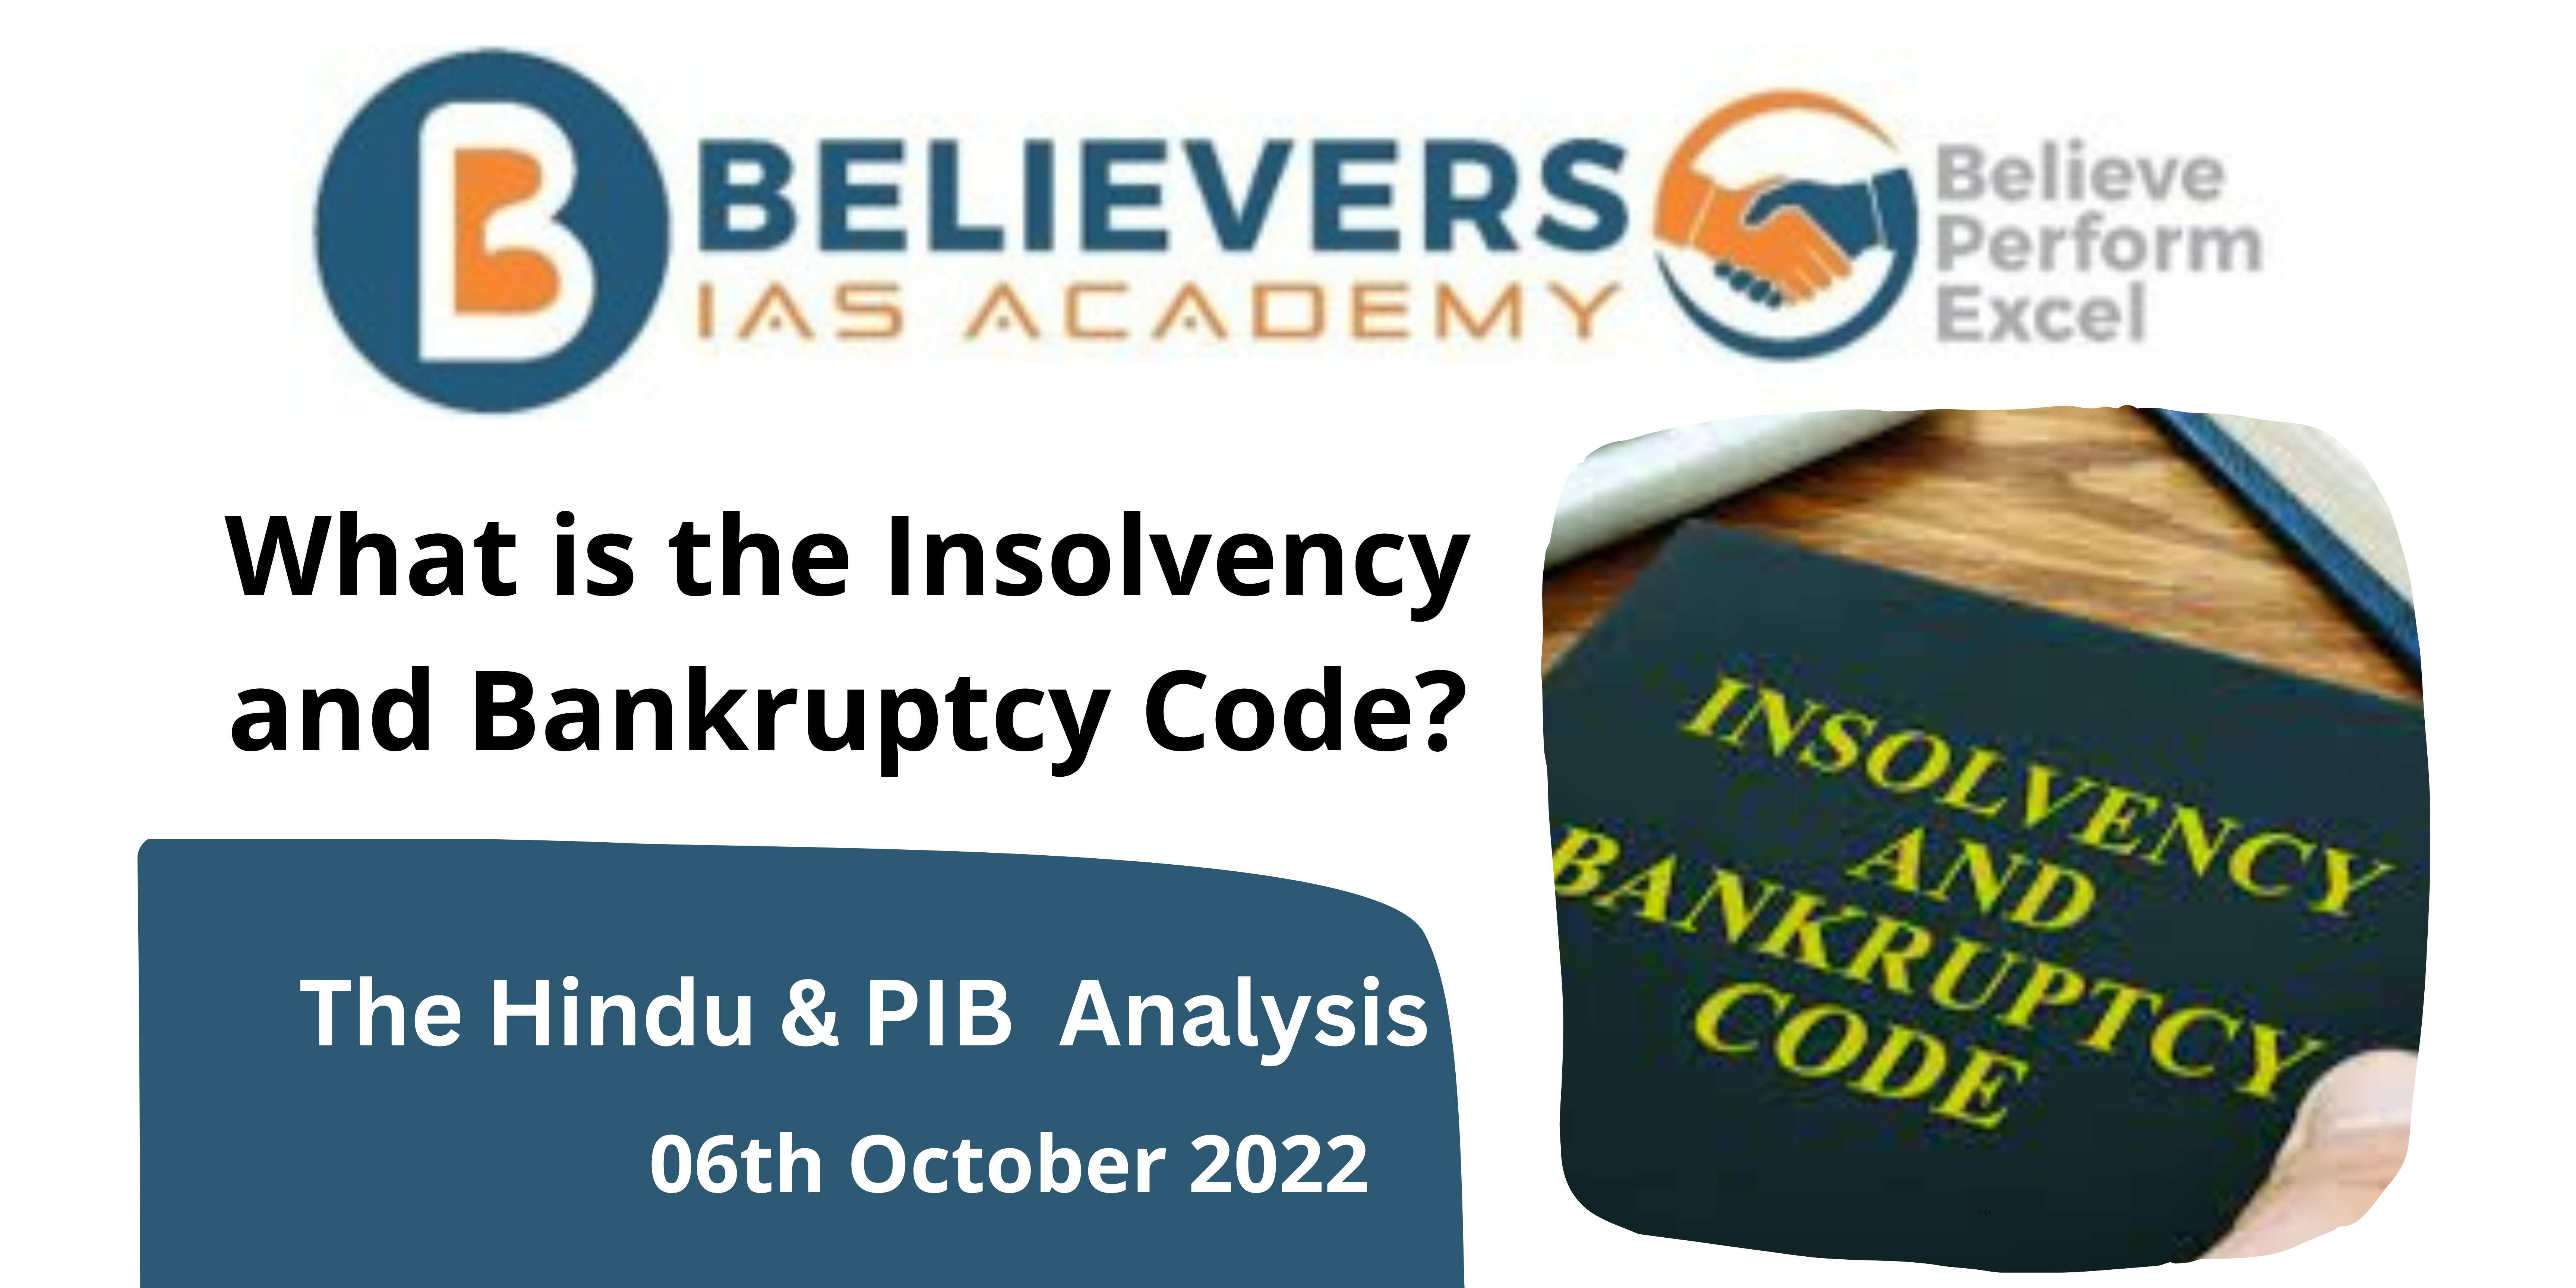 What is the Insolvency and Bankruptcy Code?